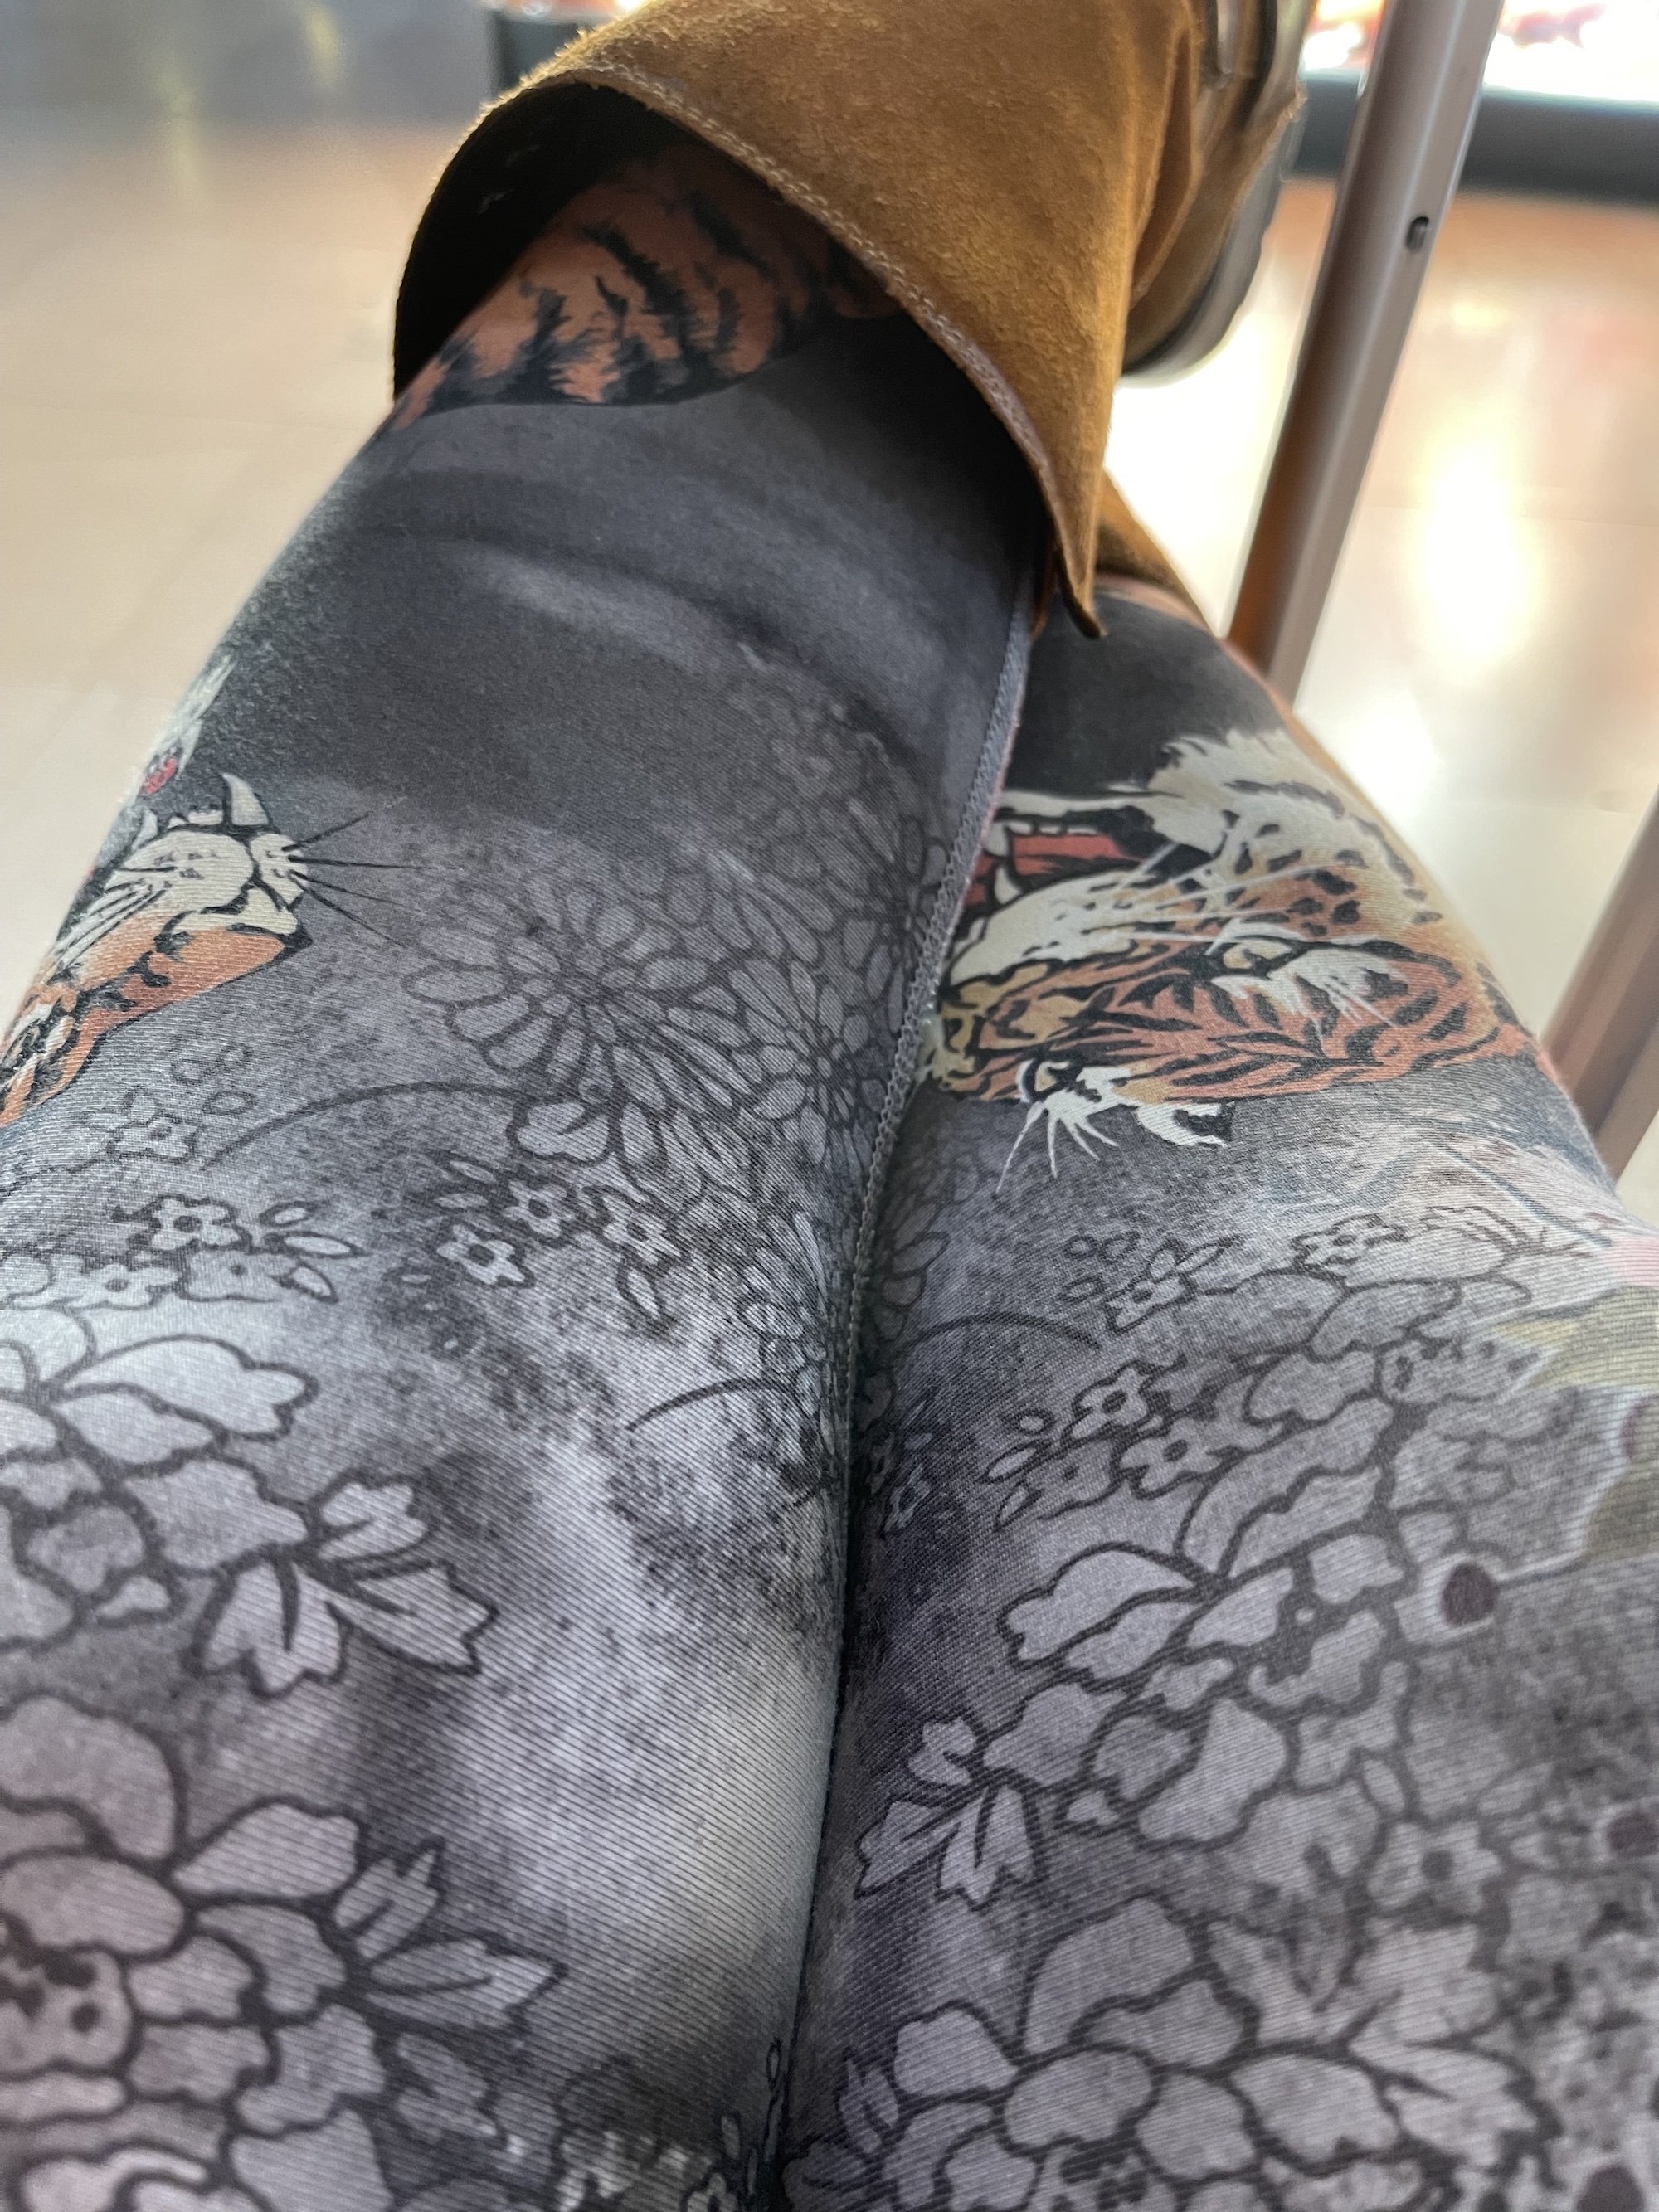 My leggings have tigerzzz